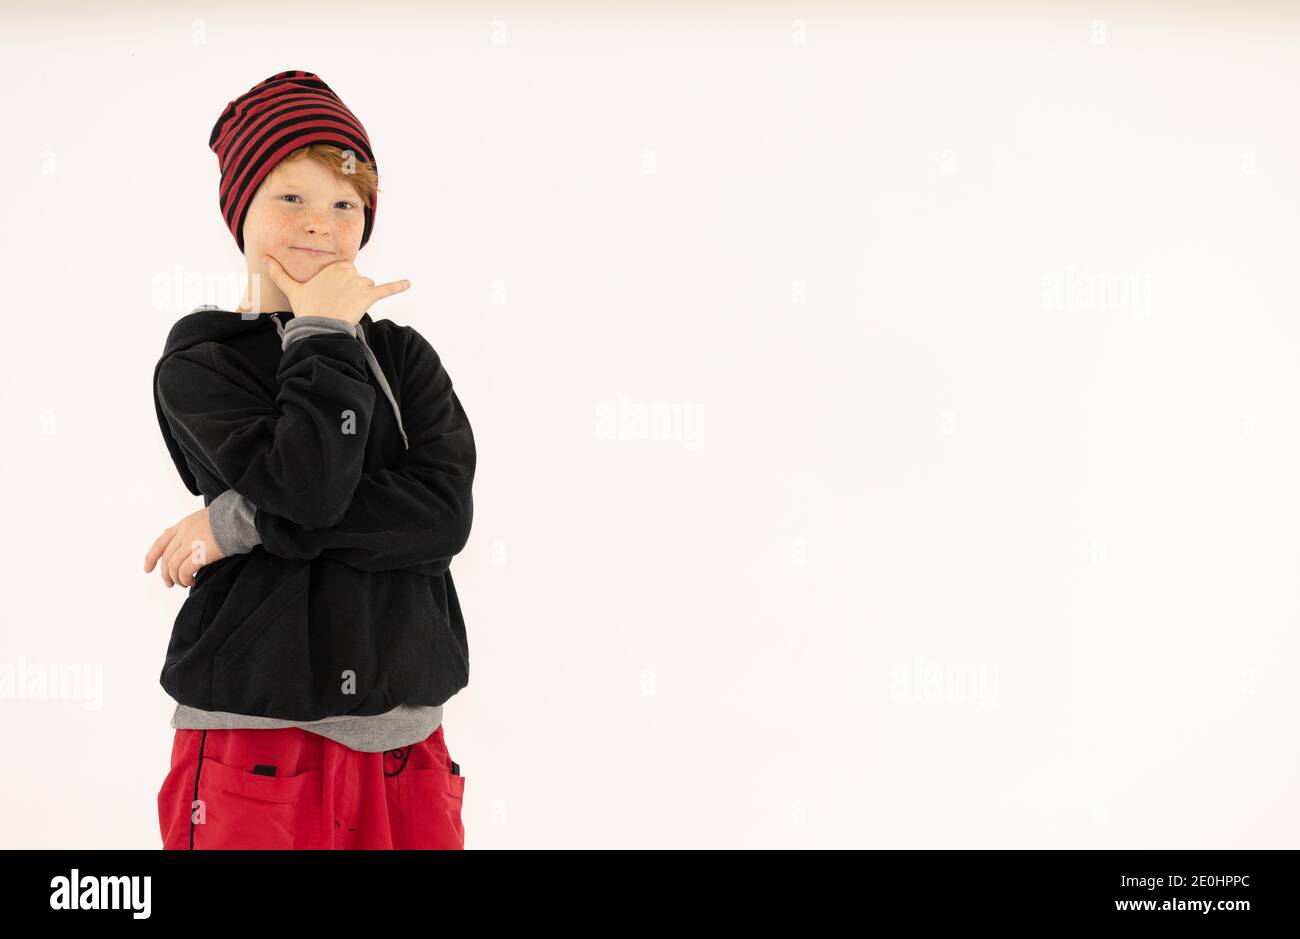 a boy with red hair in a cap poses on a white background Stock Photo